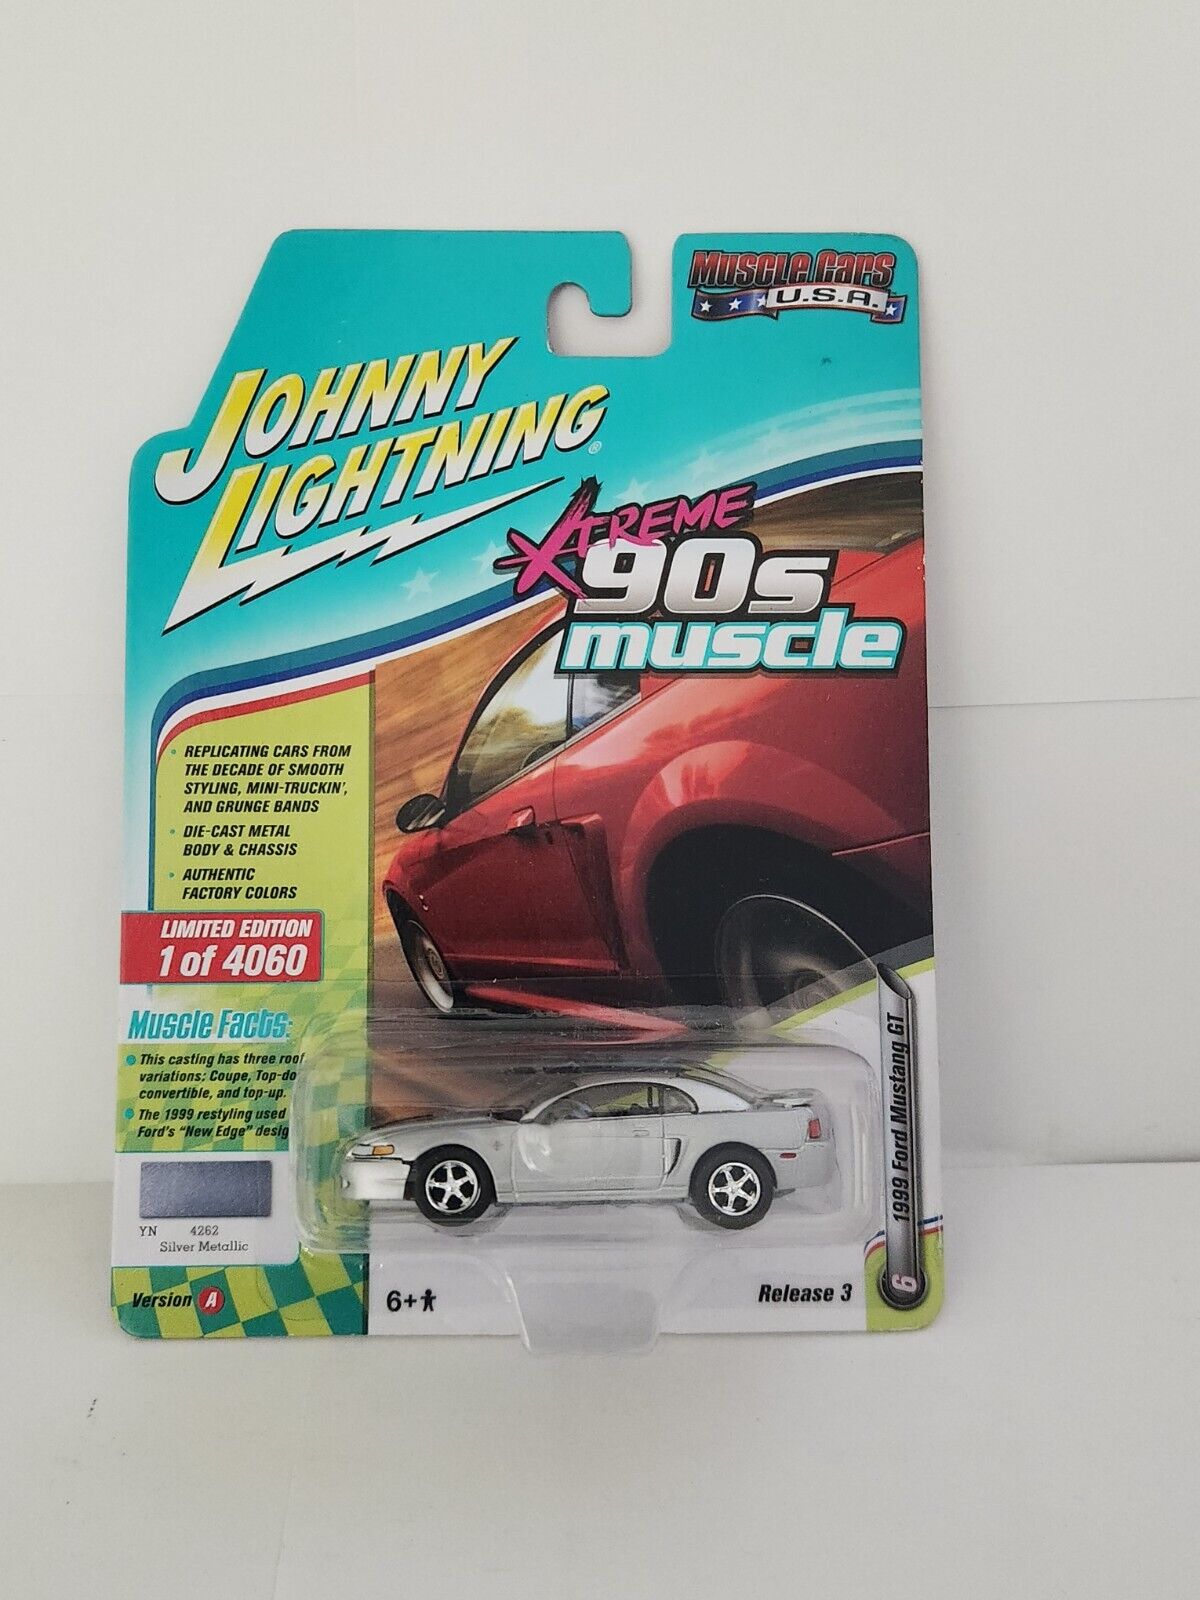 Johnny Lightning Xtreme 90s Muskel 1999 Ford MUSTANG Gt 6 L30